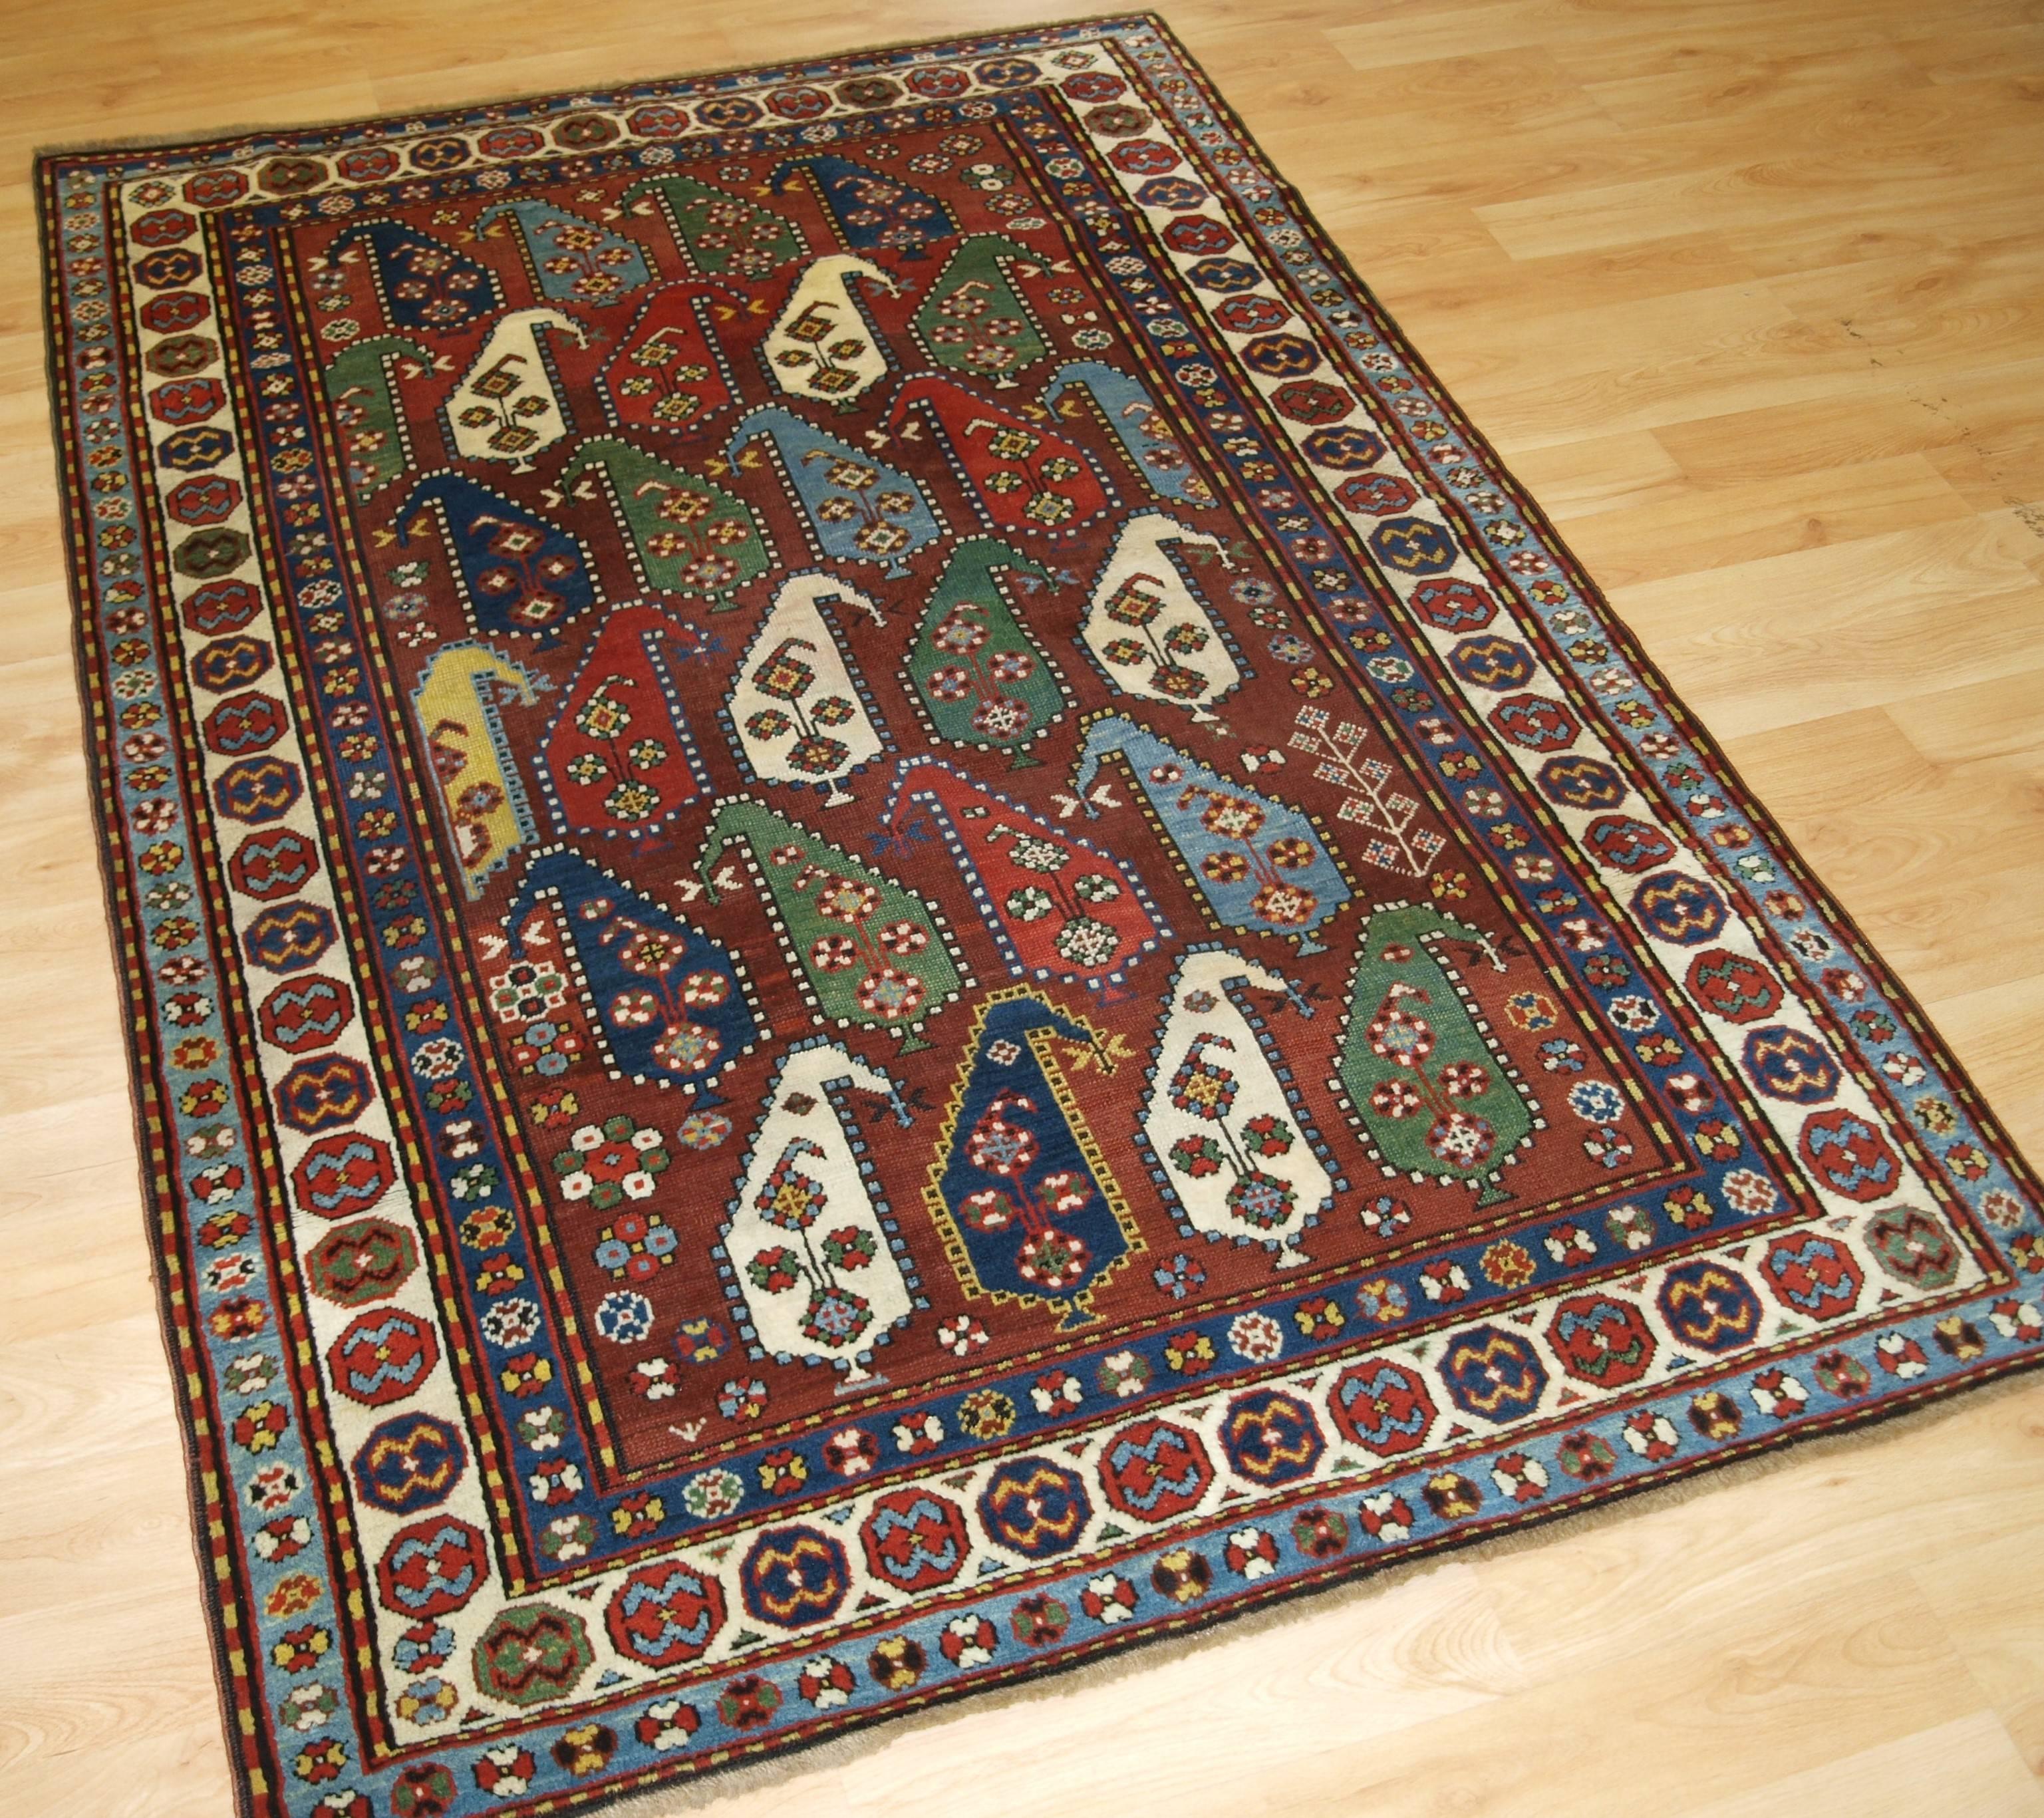 Size: 6ft 1in x 4ft 2in (185 x 126cm).

Antique Caucasian Karabagh region rug with colorful large scale boteh design.

Late 19th century.

A superb example of a Karabagh region rug drawn with very large boteh on a deep burgundy red field. Each